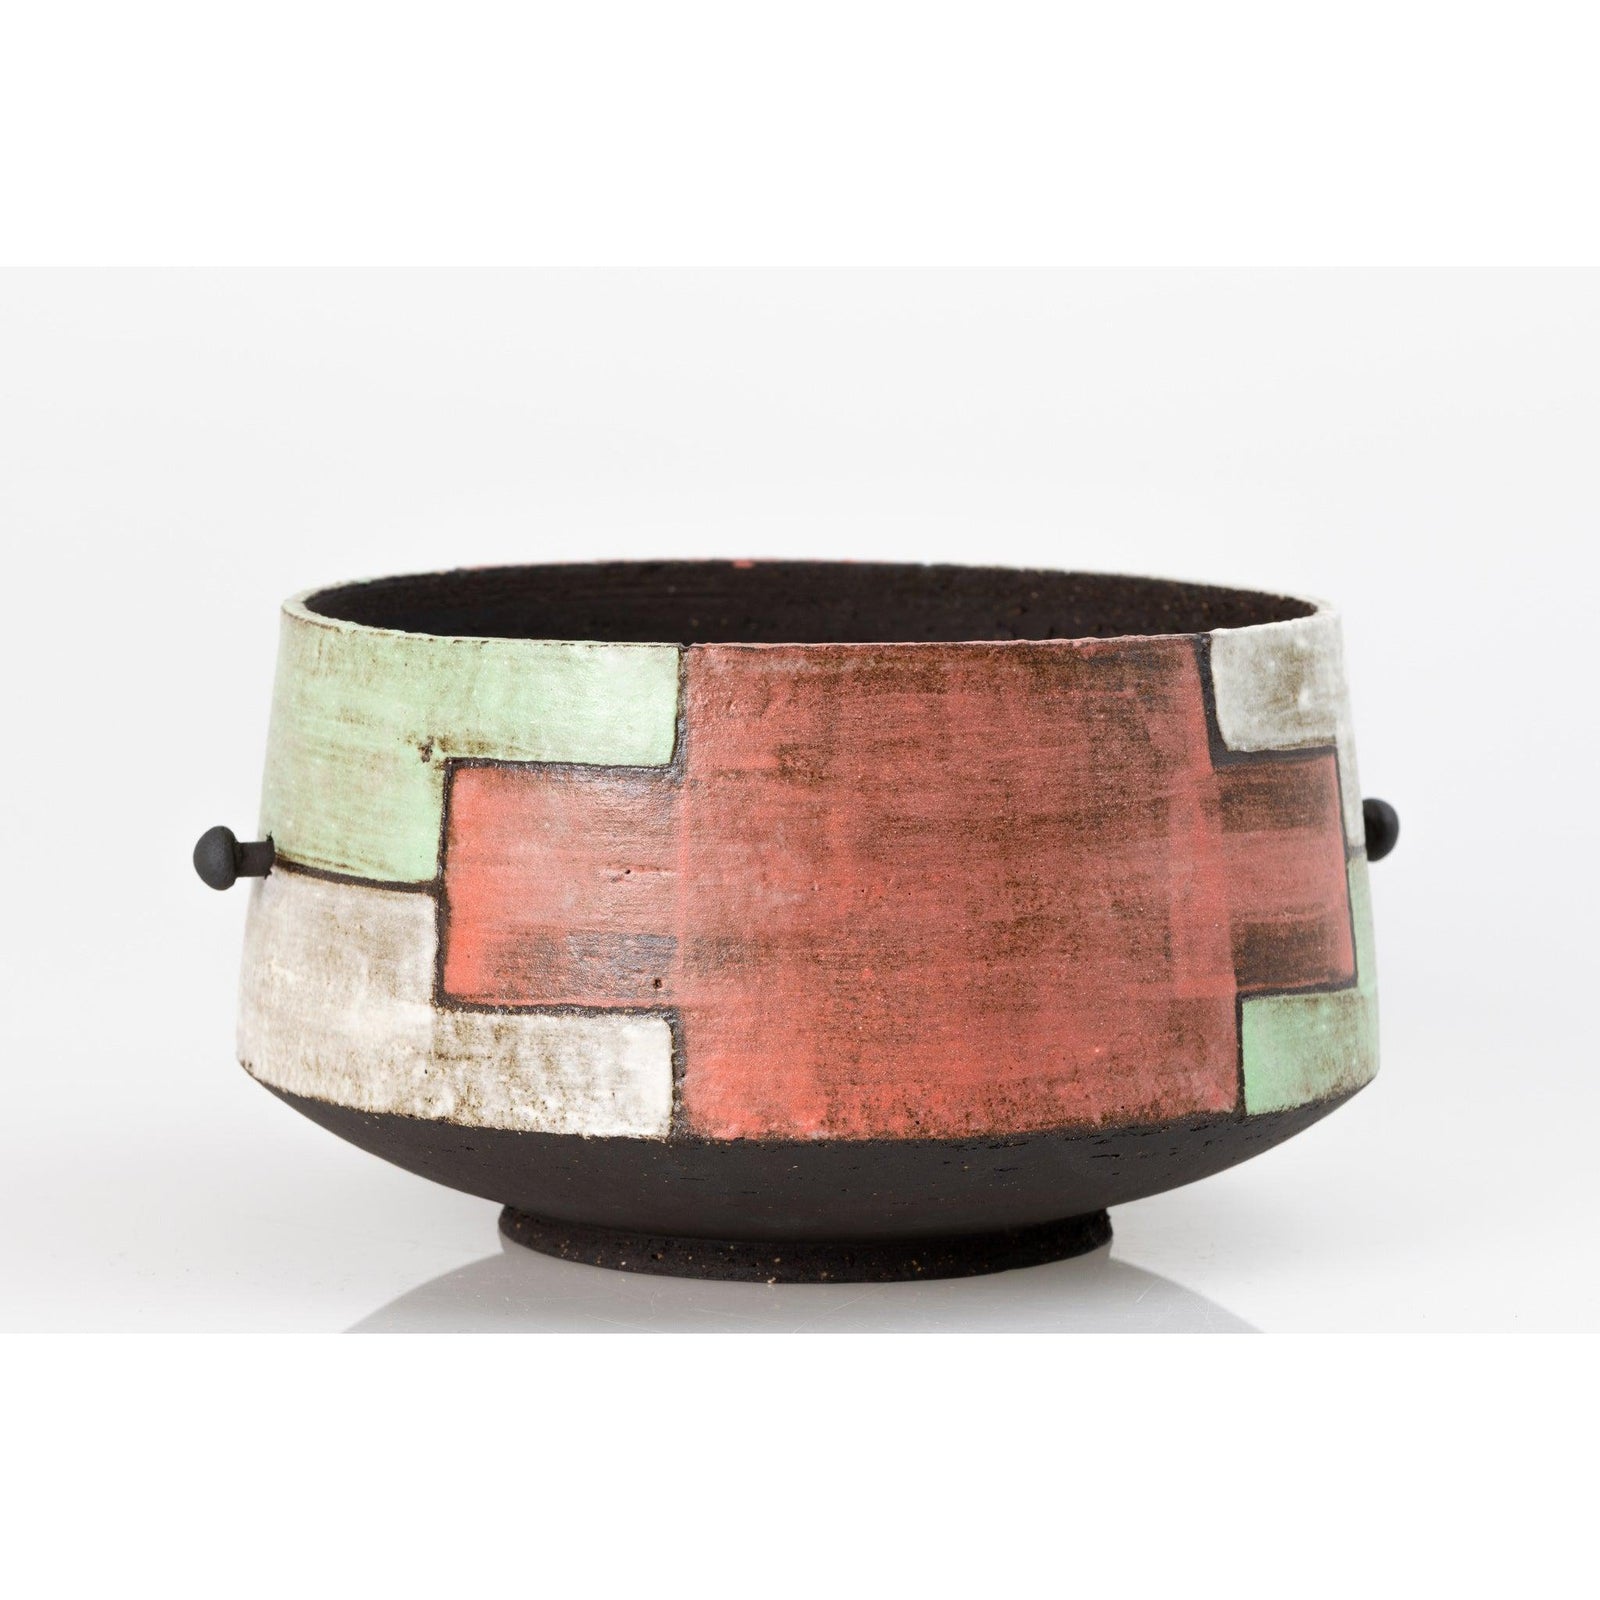 'AP43 Black Bowl with "washed" colours' by Ania Perkowska, available at Padstow Gallery, Cornwall